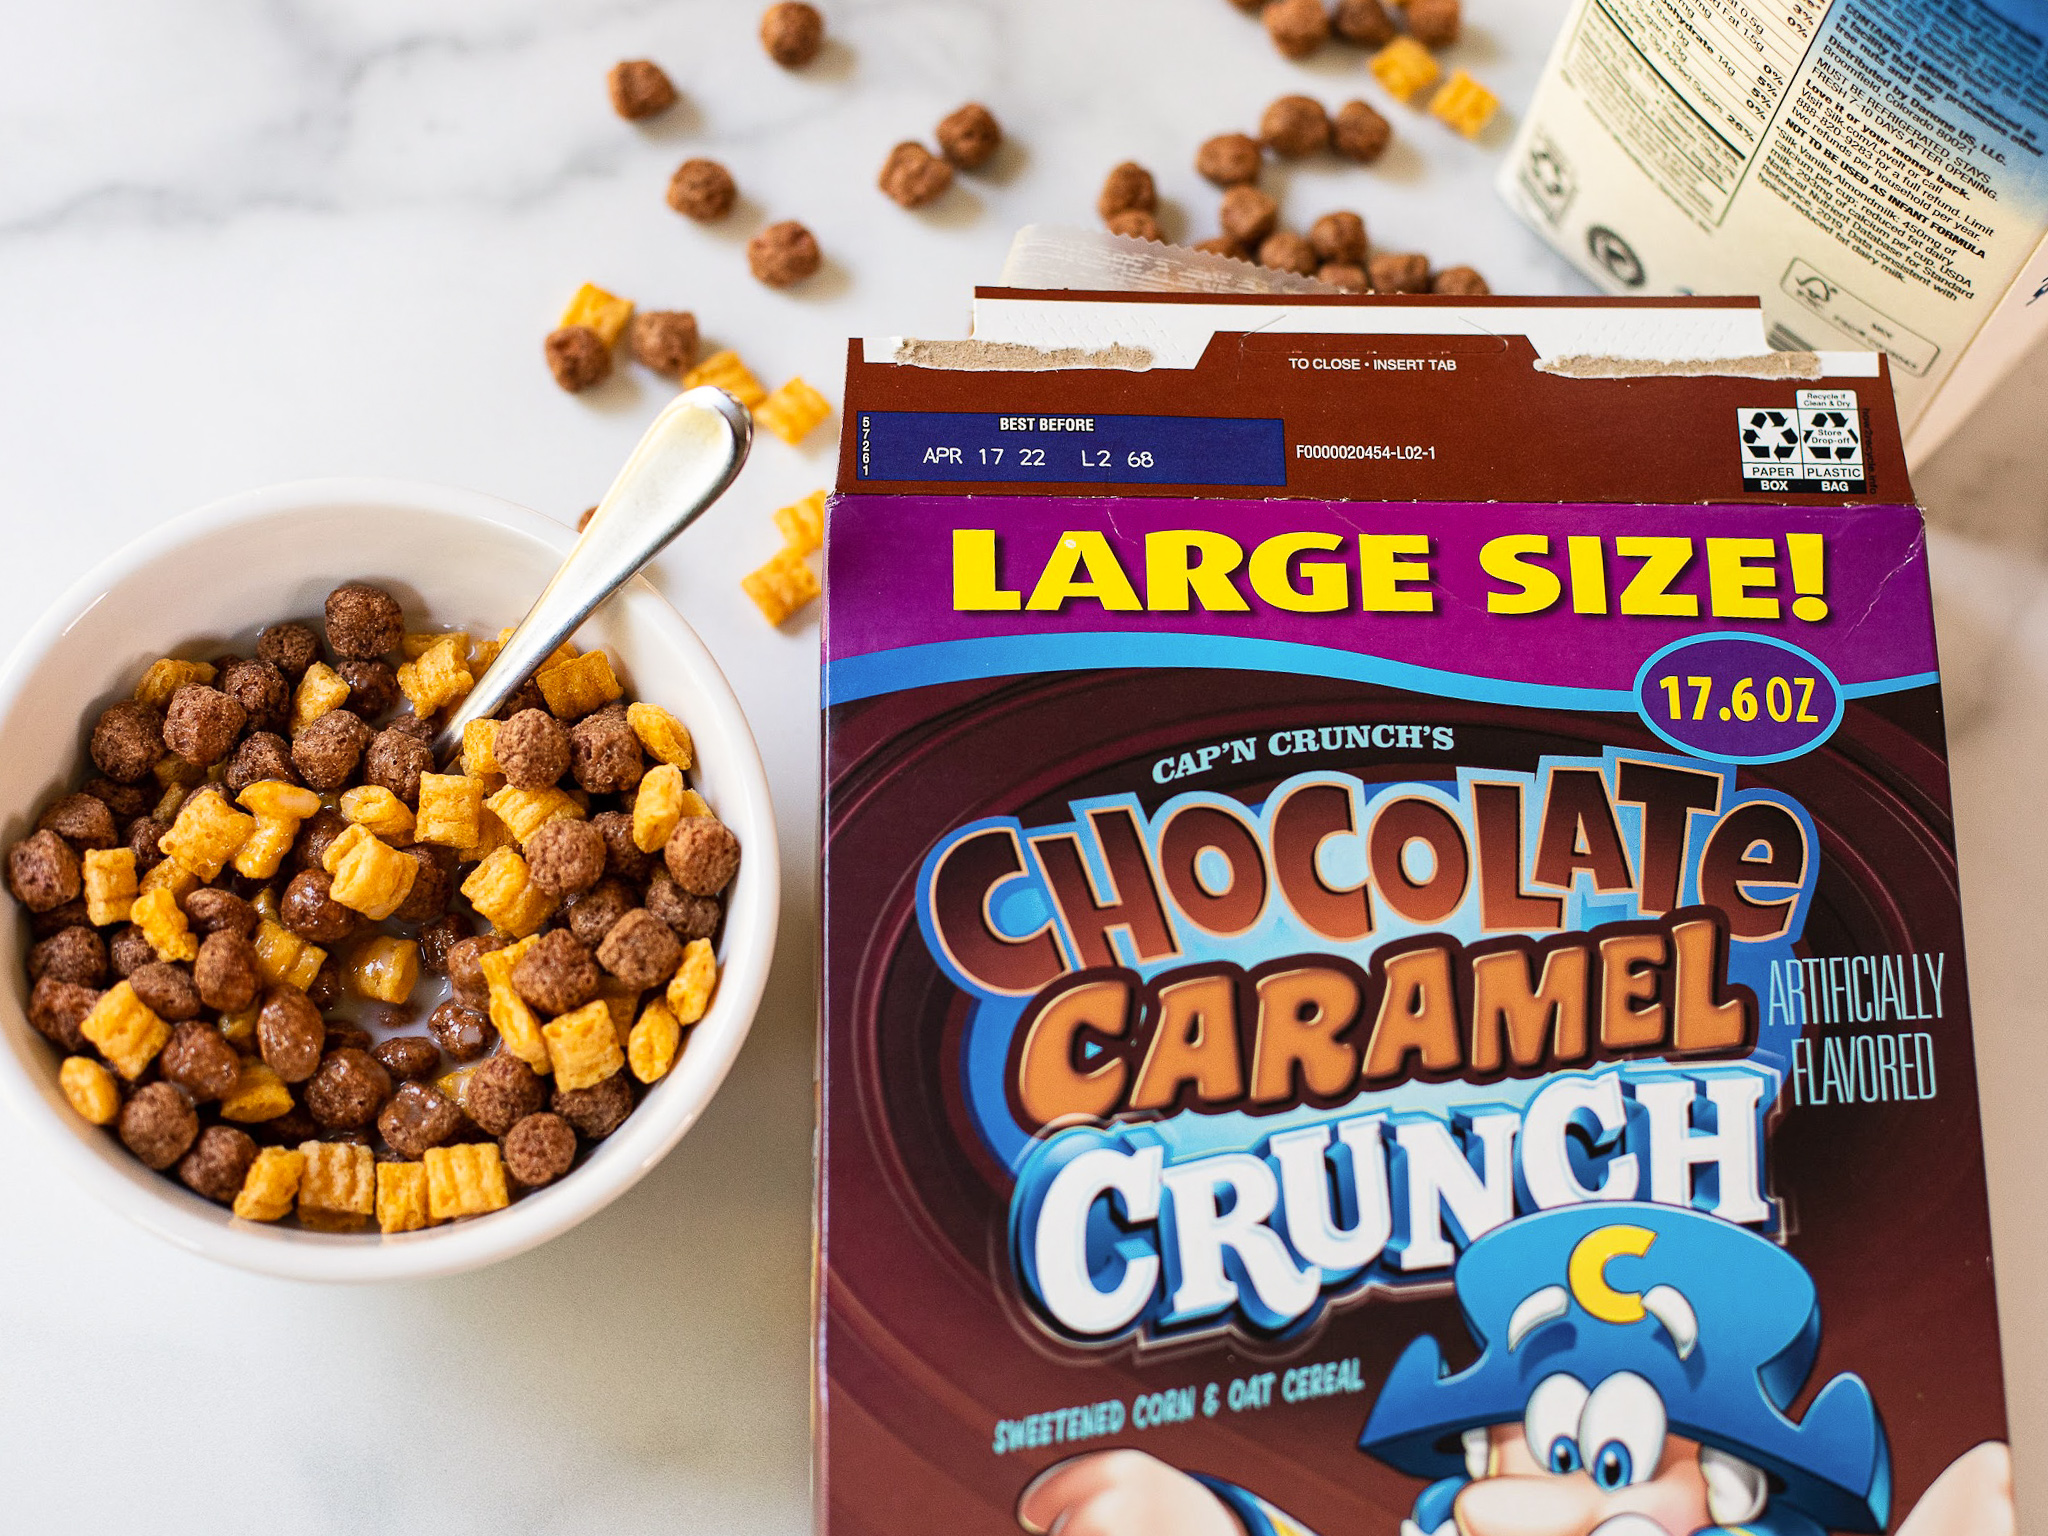 New Cap’N Crunch Cereal Coupon For The Publix Sale – Get The Big Boxes For Just $2.40